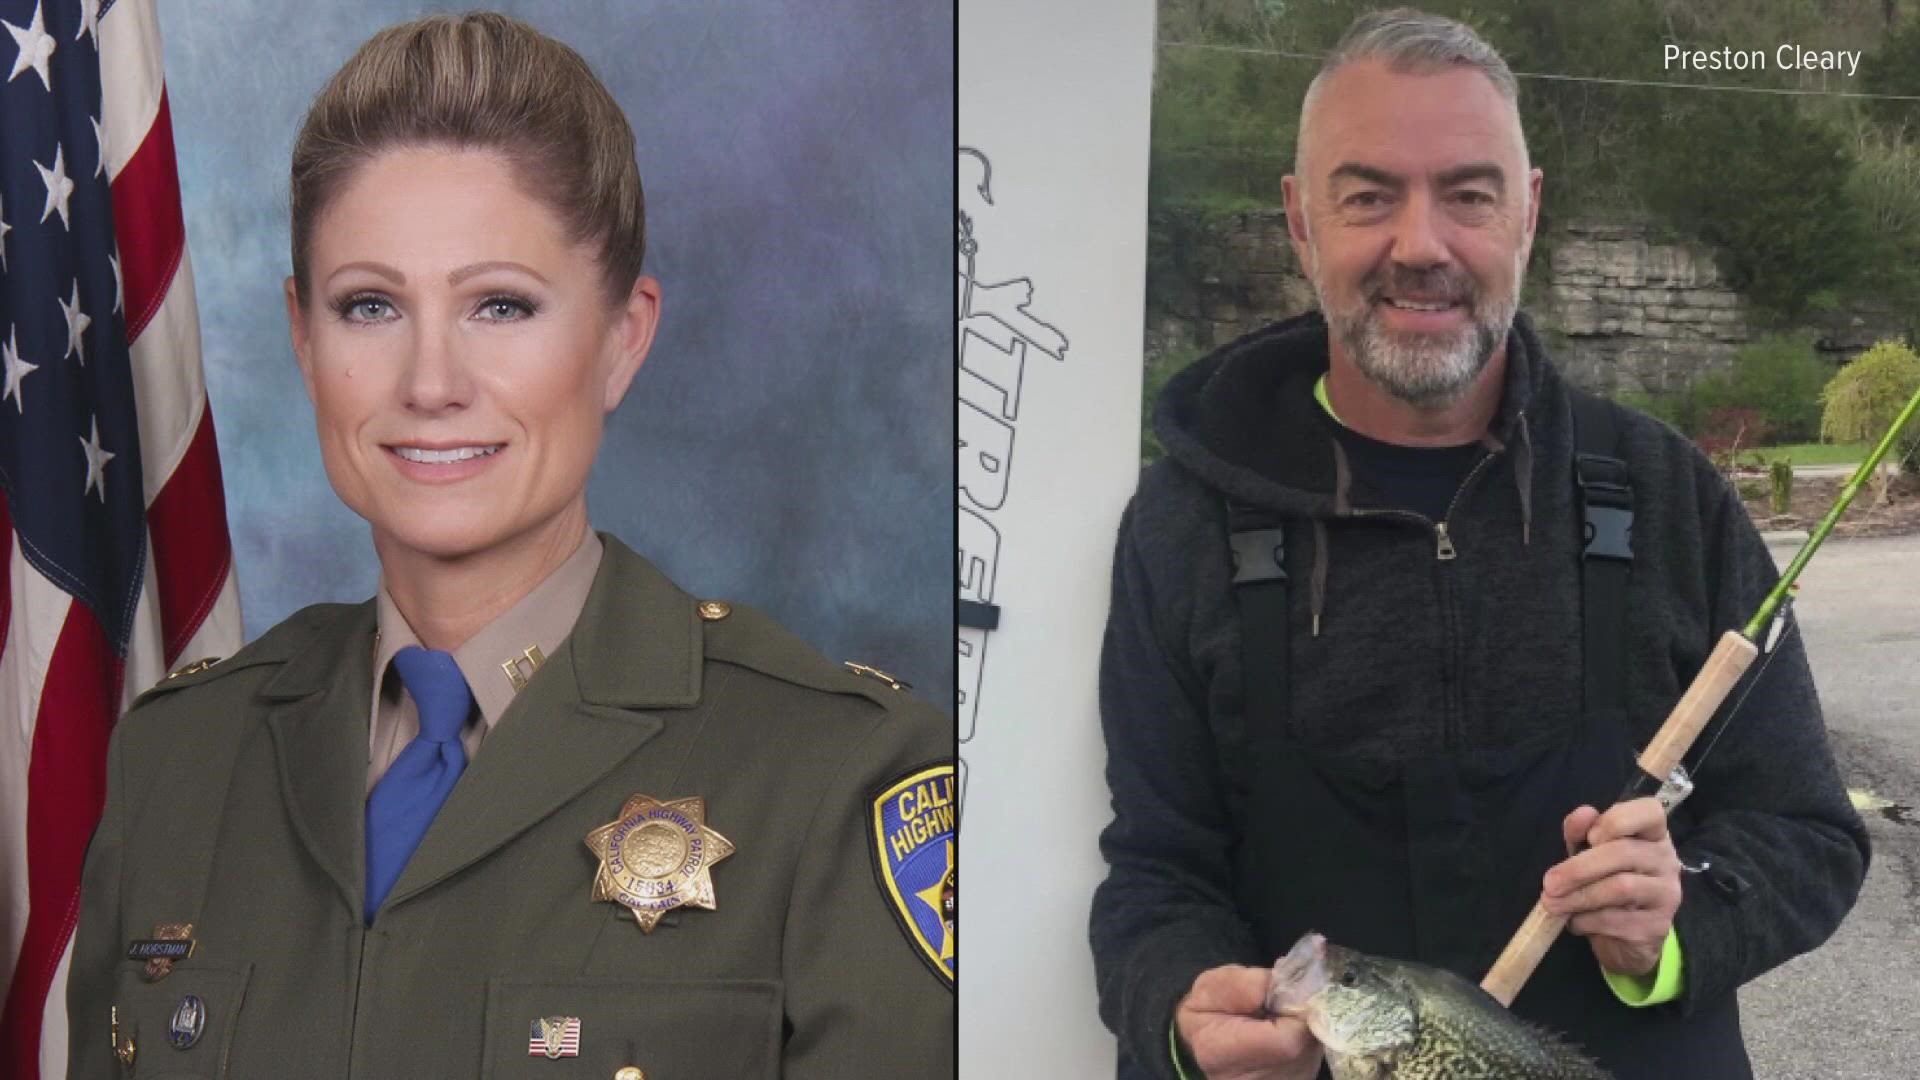 Julie Harding was a commander for the CHP's Yuba Sutter area. She was found dead on Dec. 10 in Tennessee.